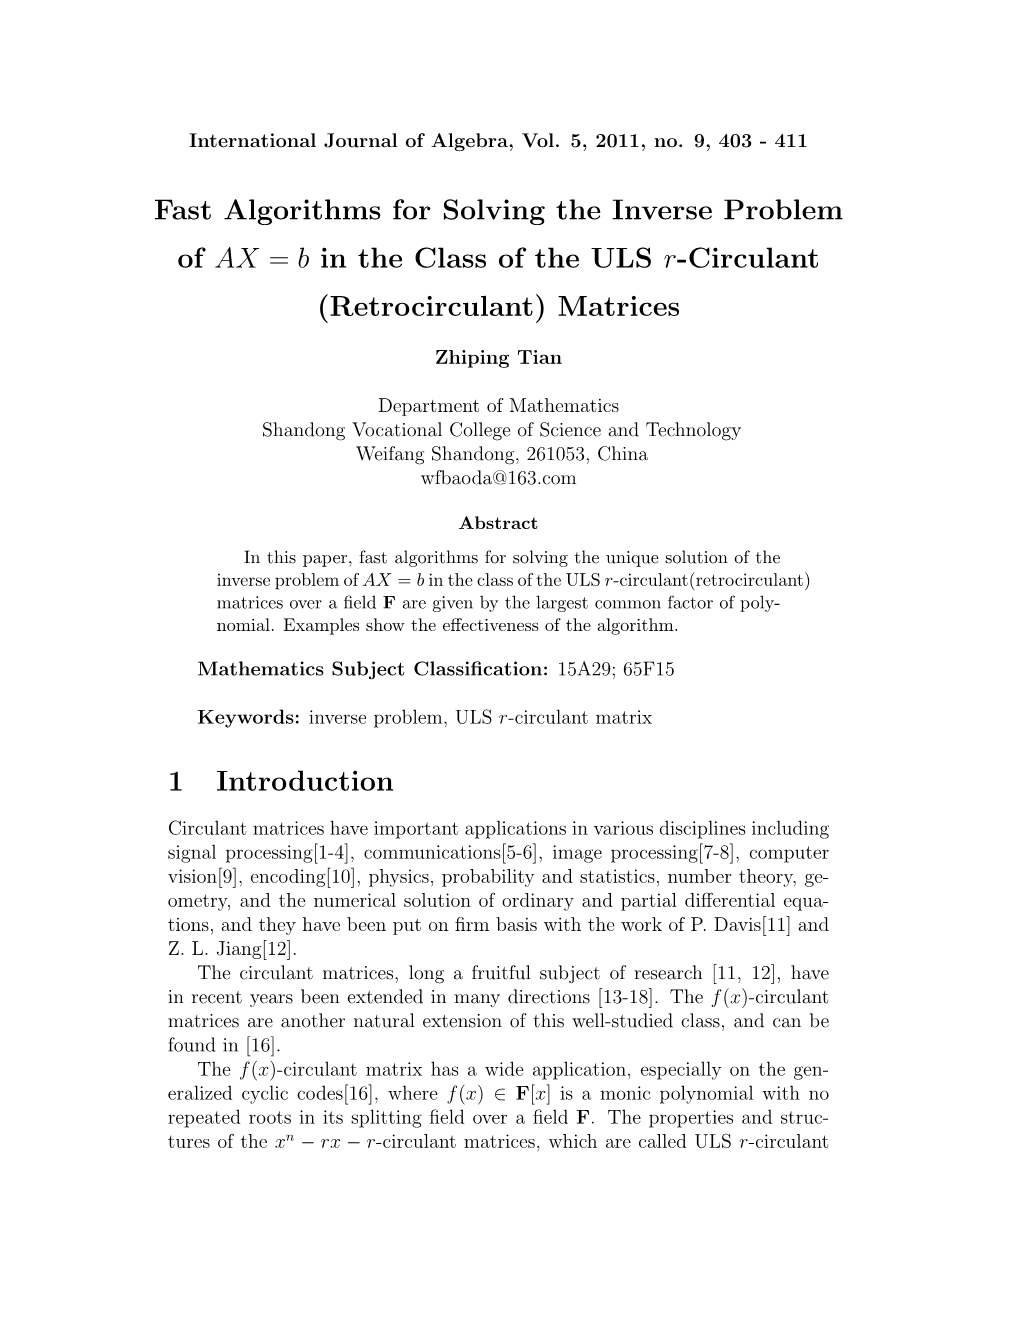 Fast Algorithms for Solving the Inverse Problem of AX B In